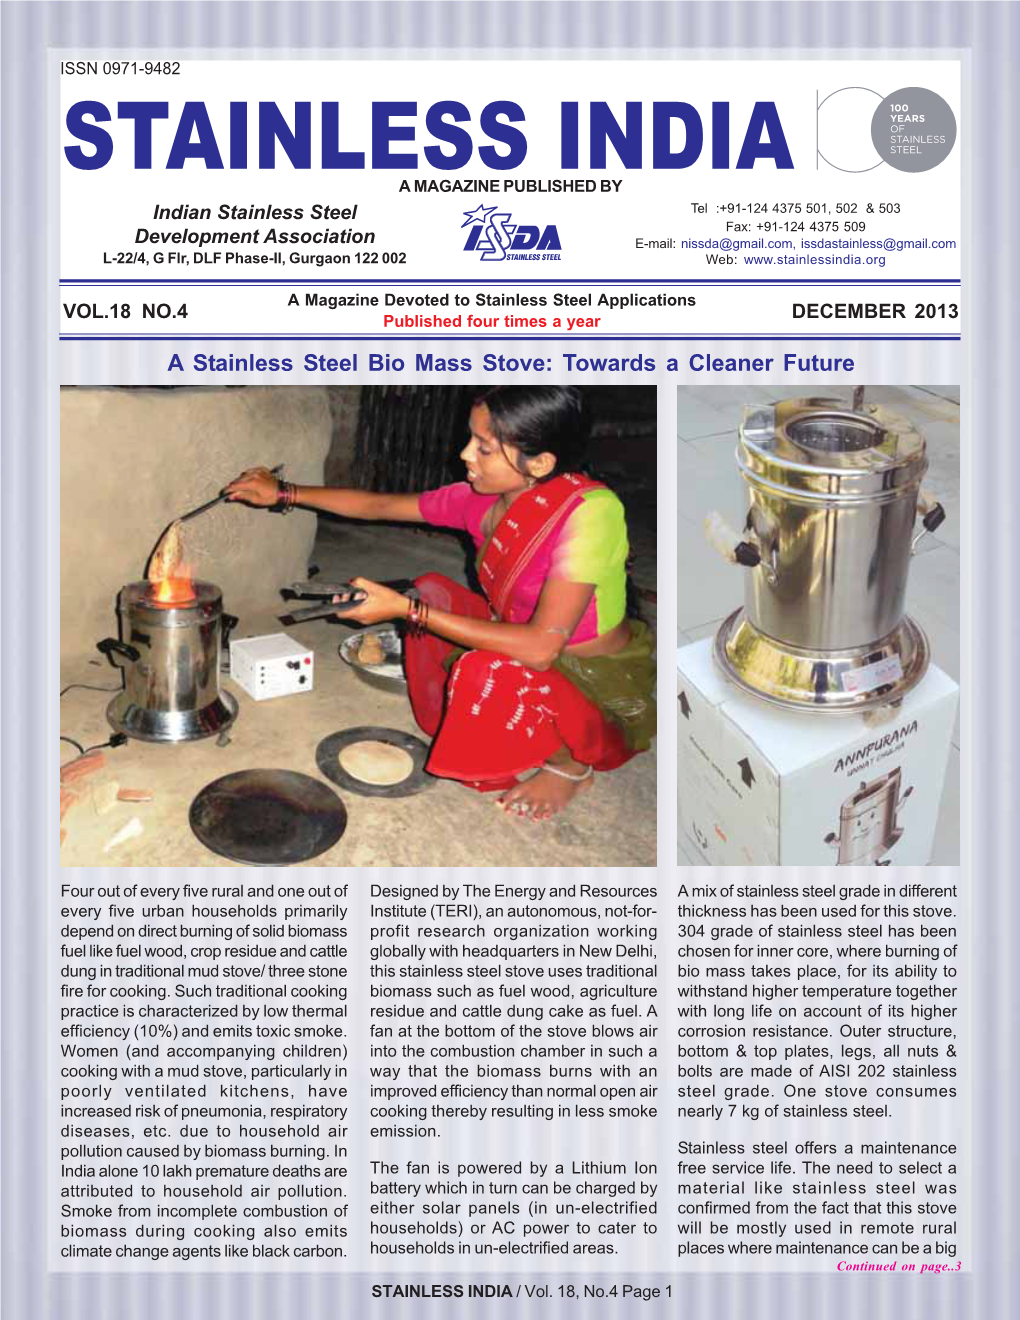 Stainless India